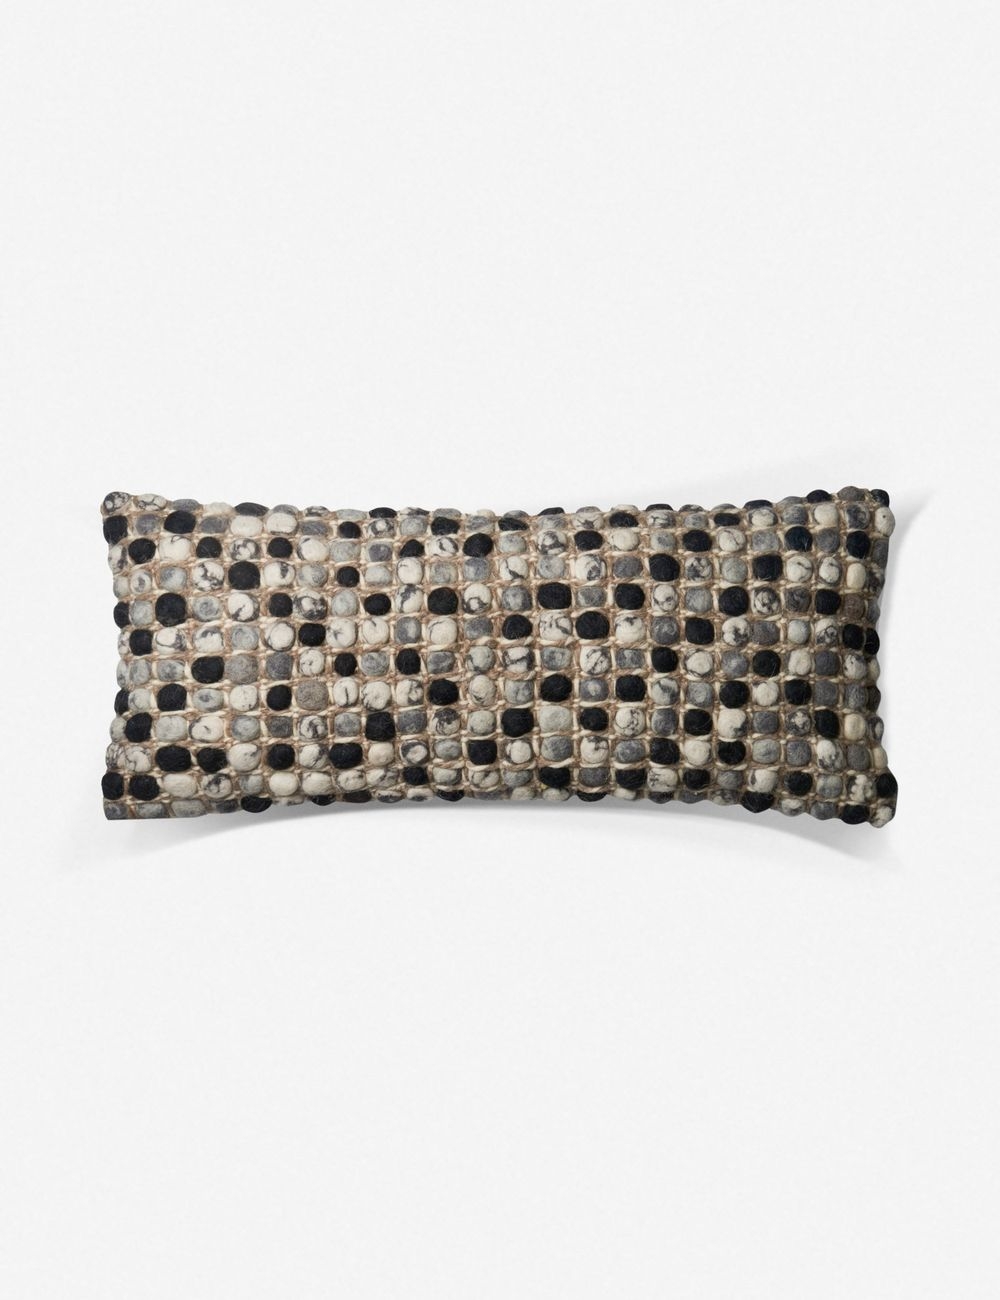 Montre Lumbar Pillow, Grey and Multi, ED Ellen DeGeneres Crafted by Loloi - Image 0